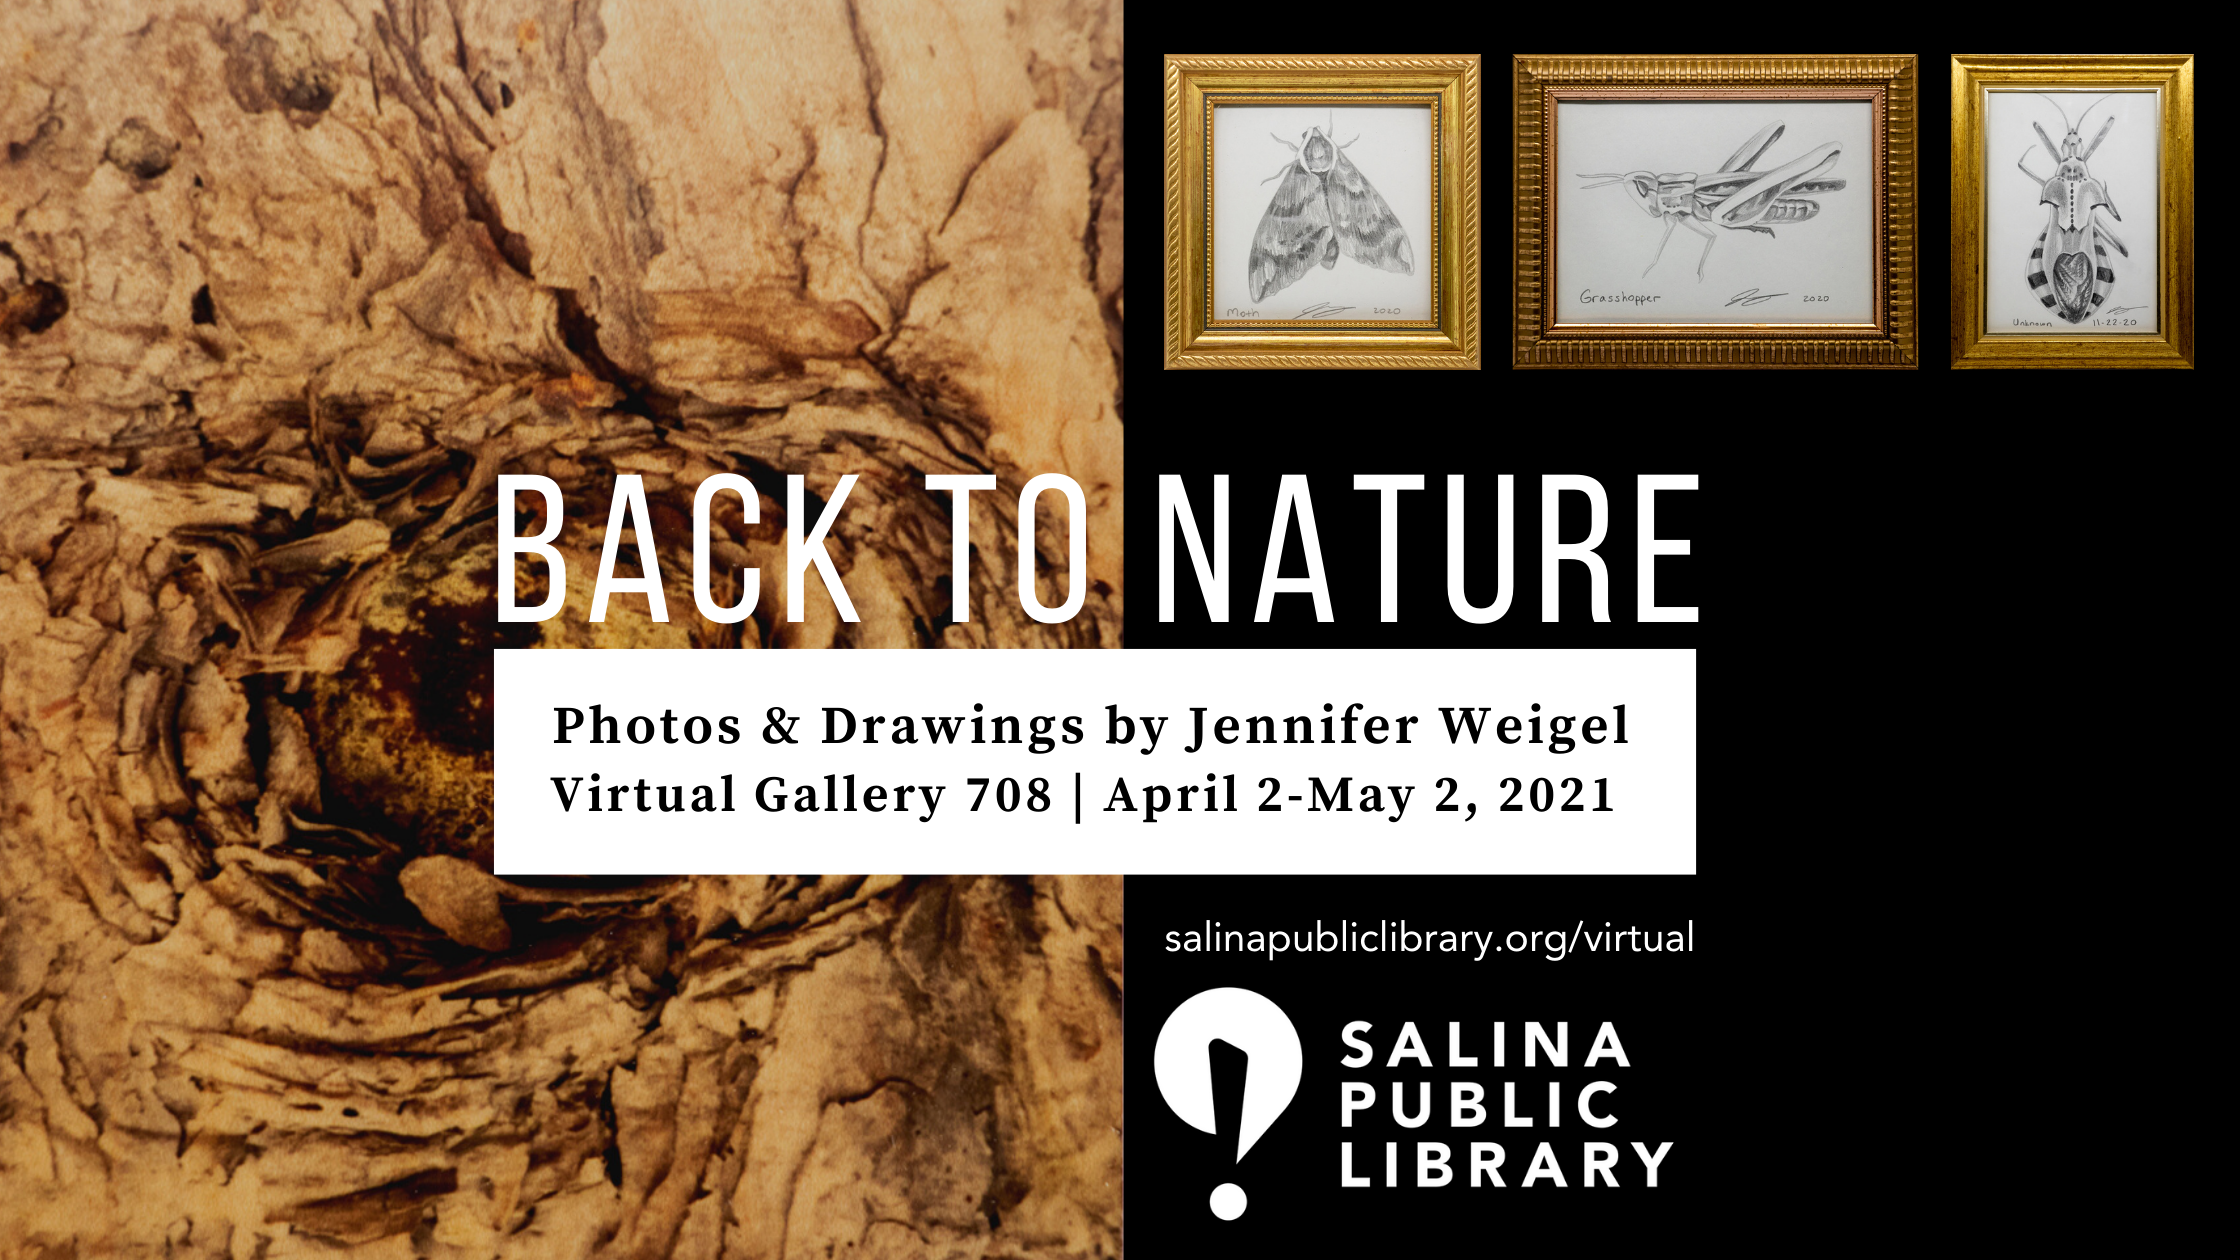 Invitation card including images from virtual gallery 708 exhibit Back to Nature